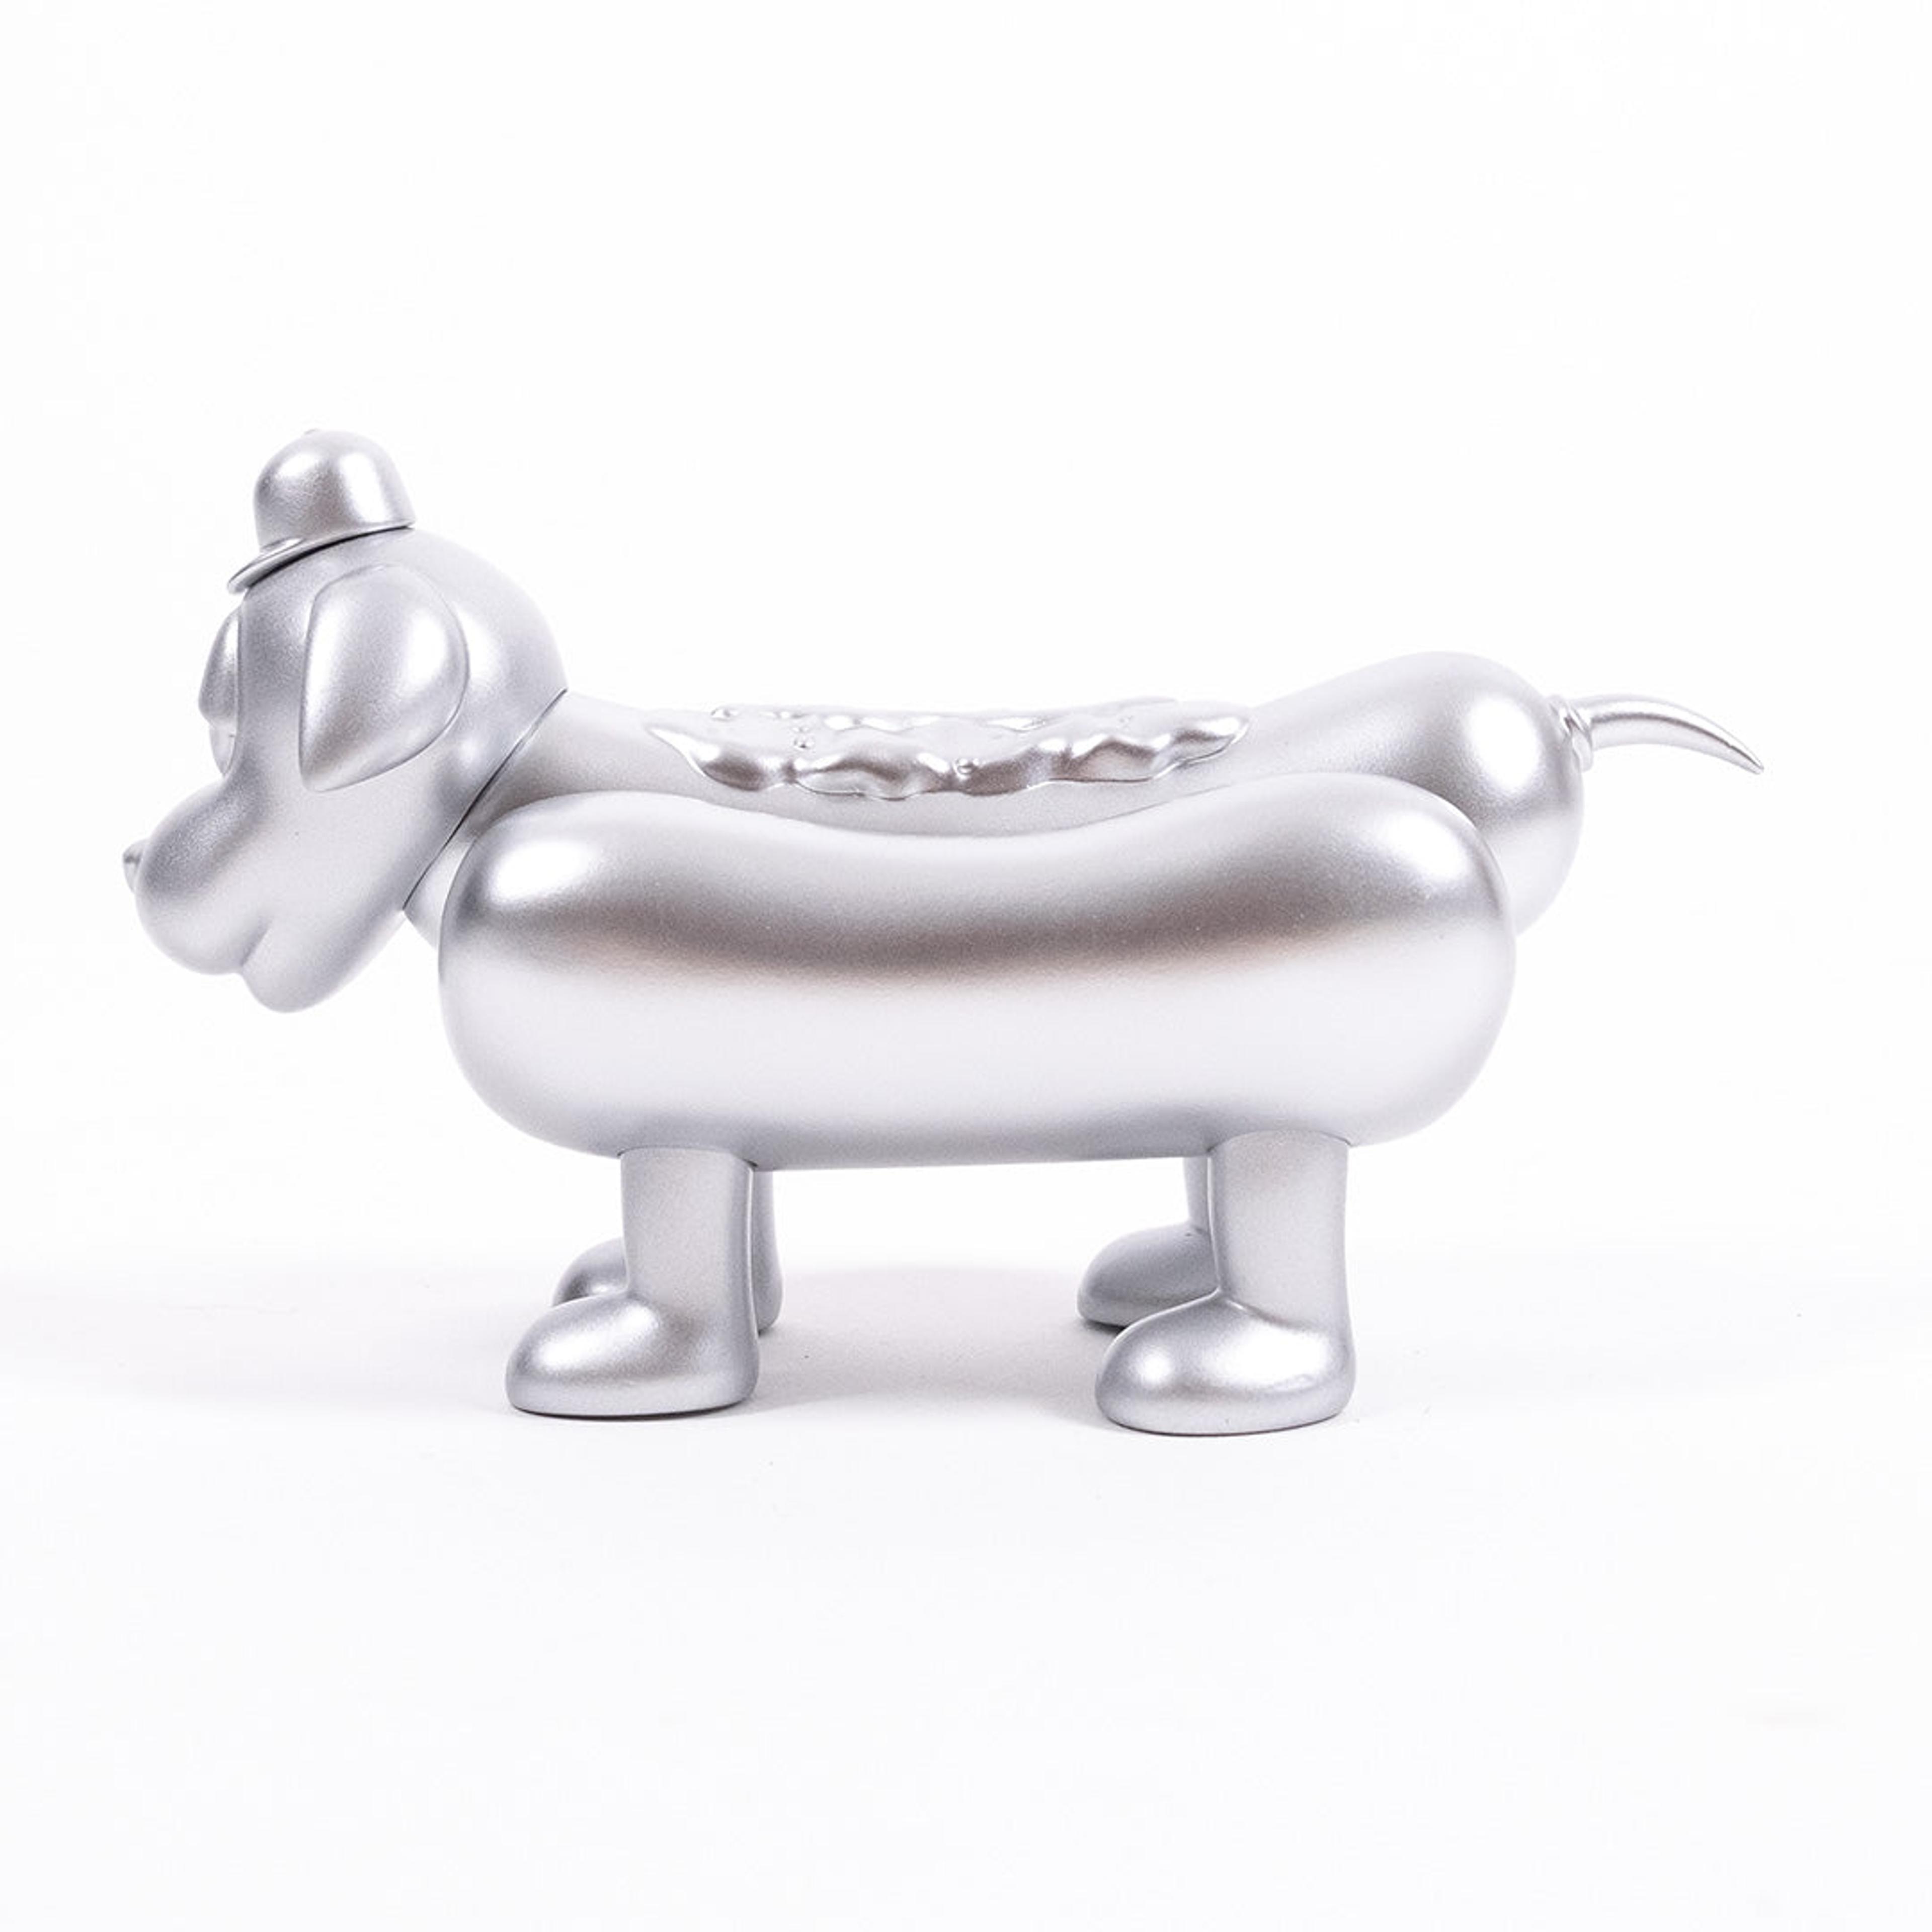 Alternate View 7 of Sheefy Coney Dog Sculpture - Silver